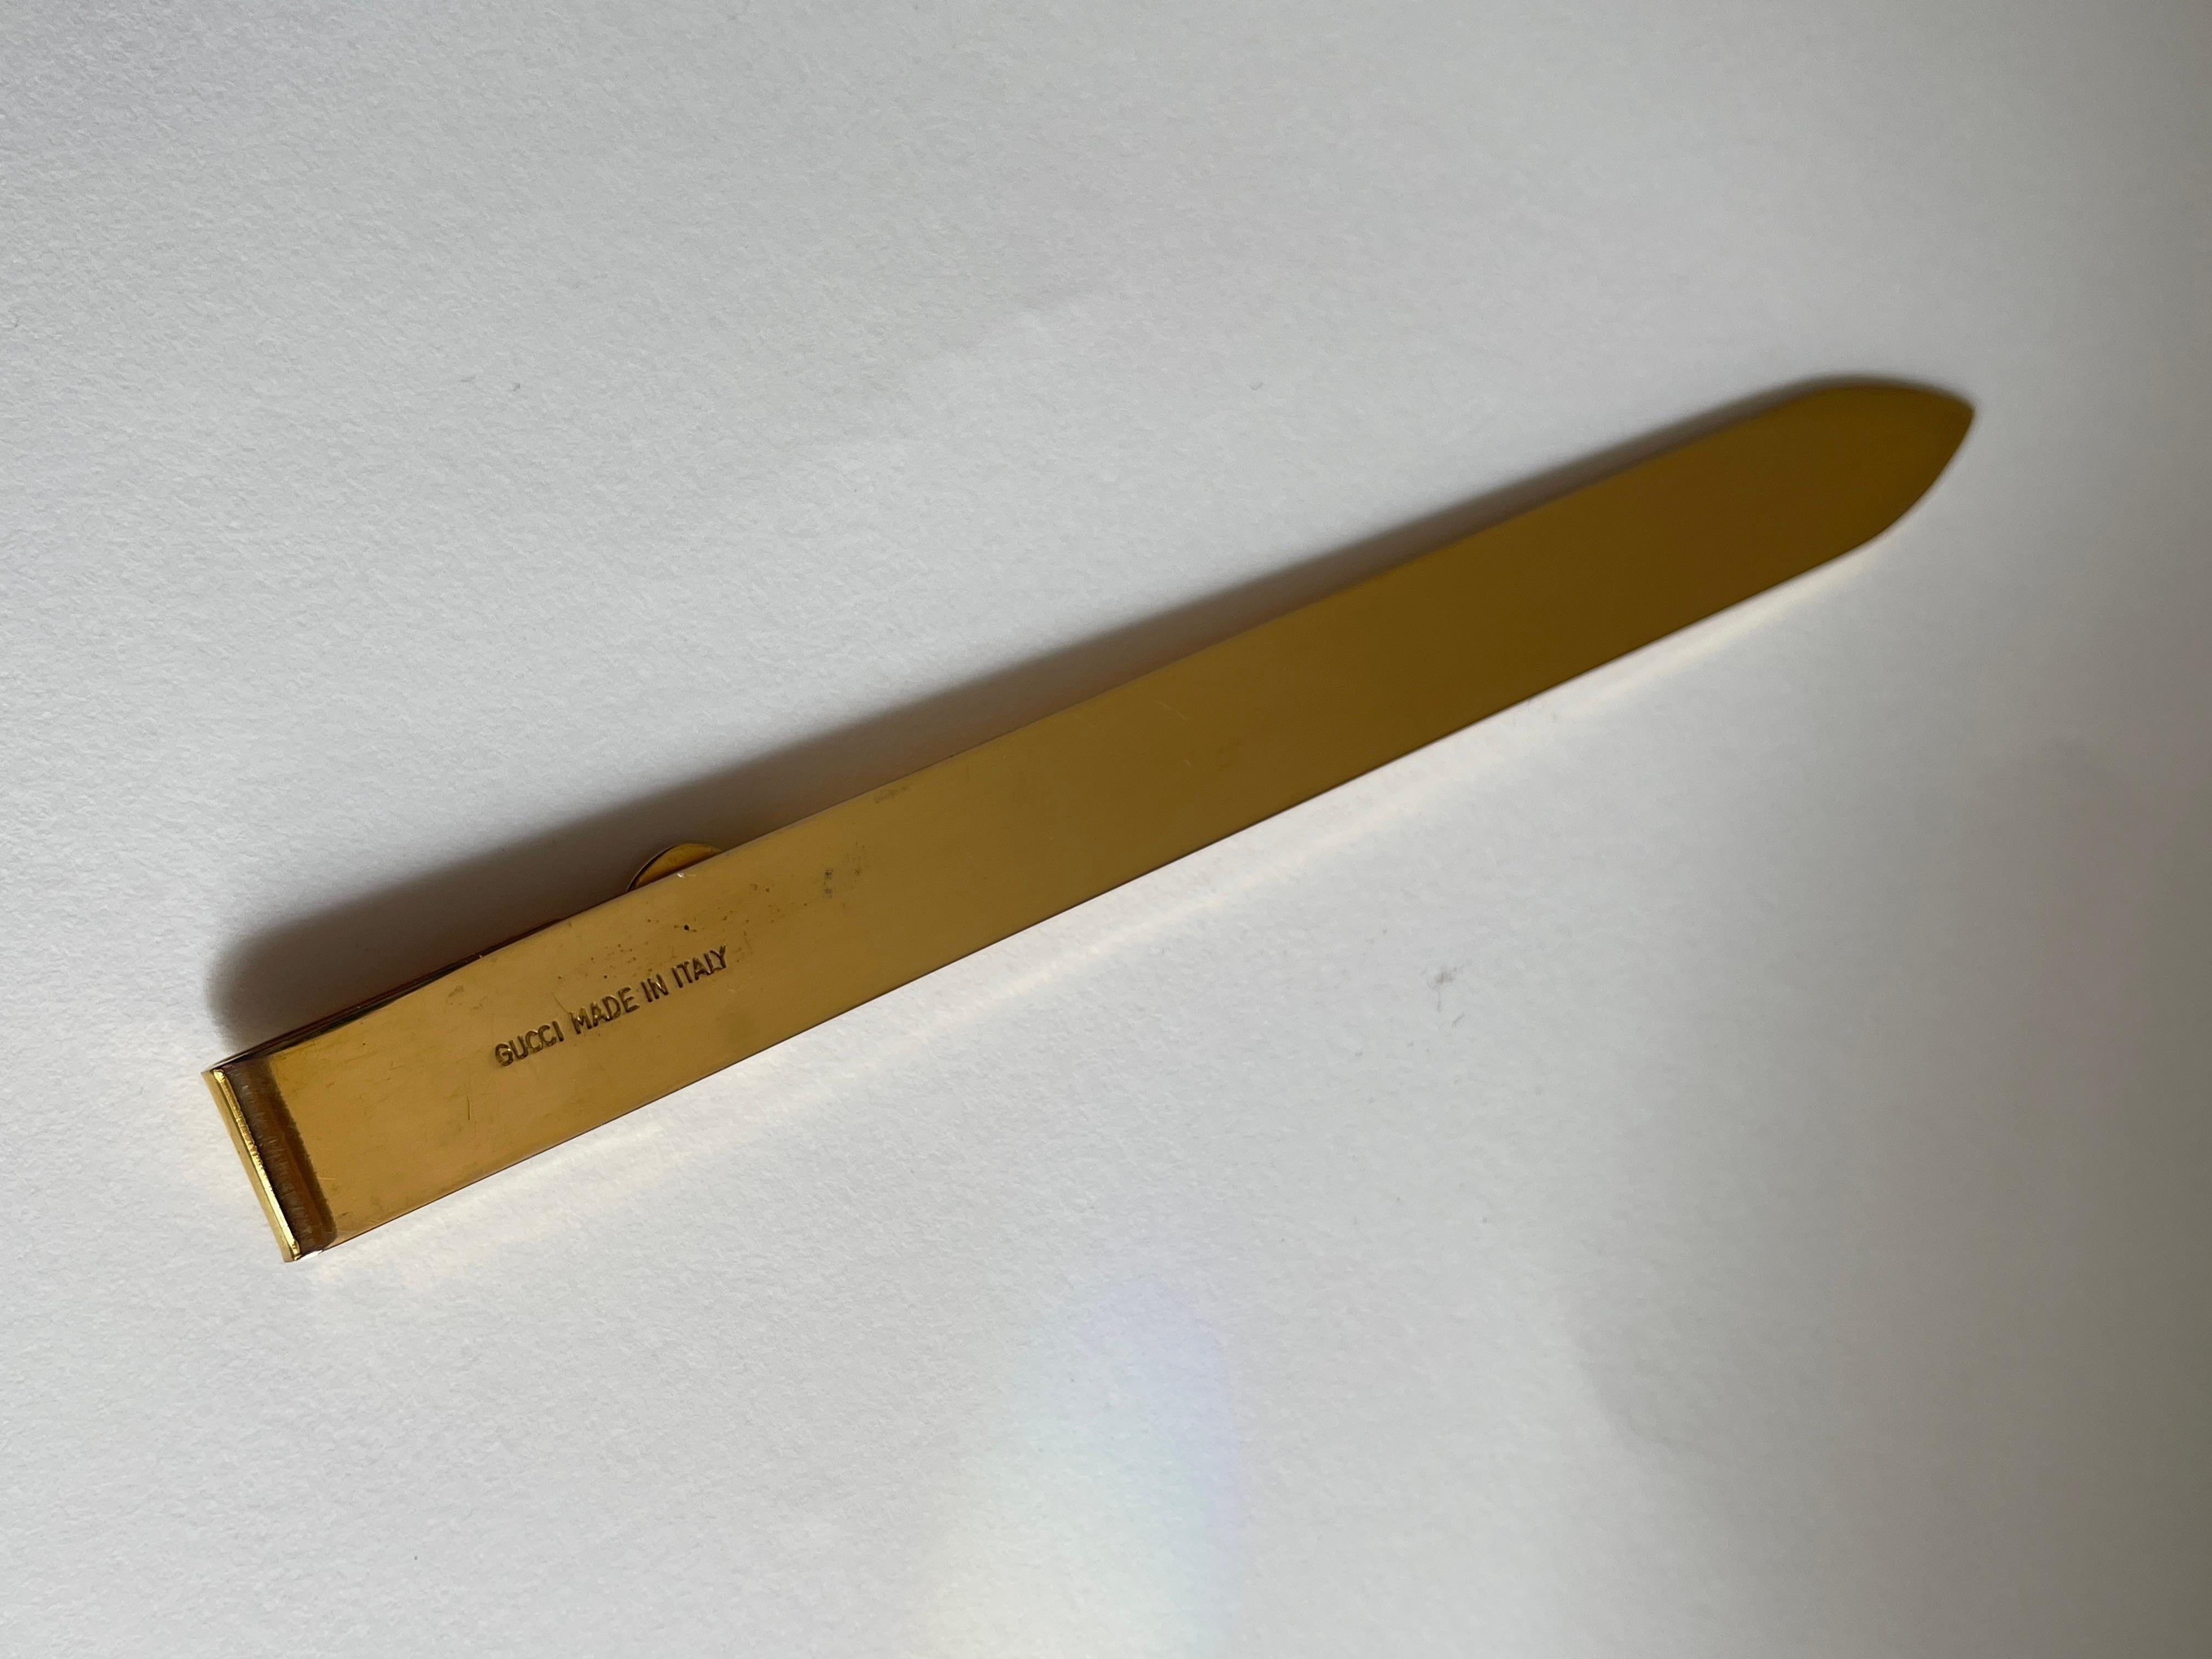 Gucci Gold Metal Letter Opener in Black Leather Case For Sale 3